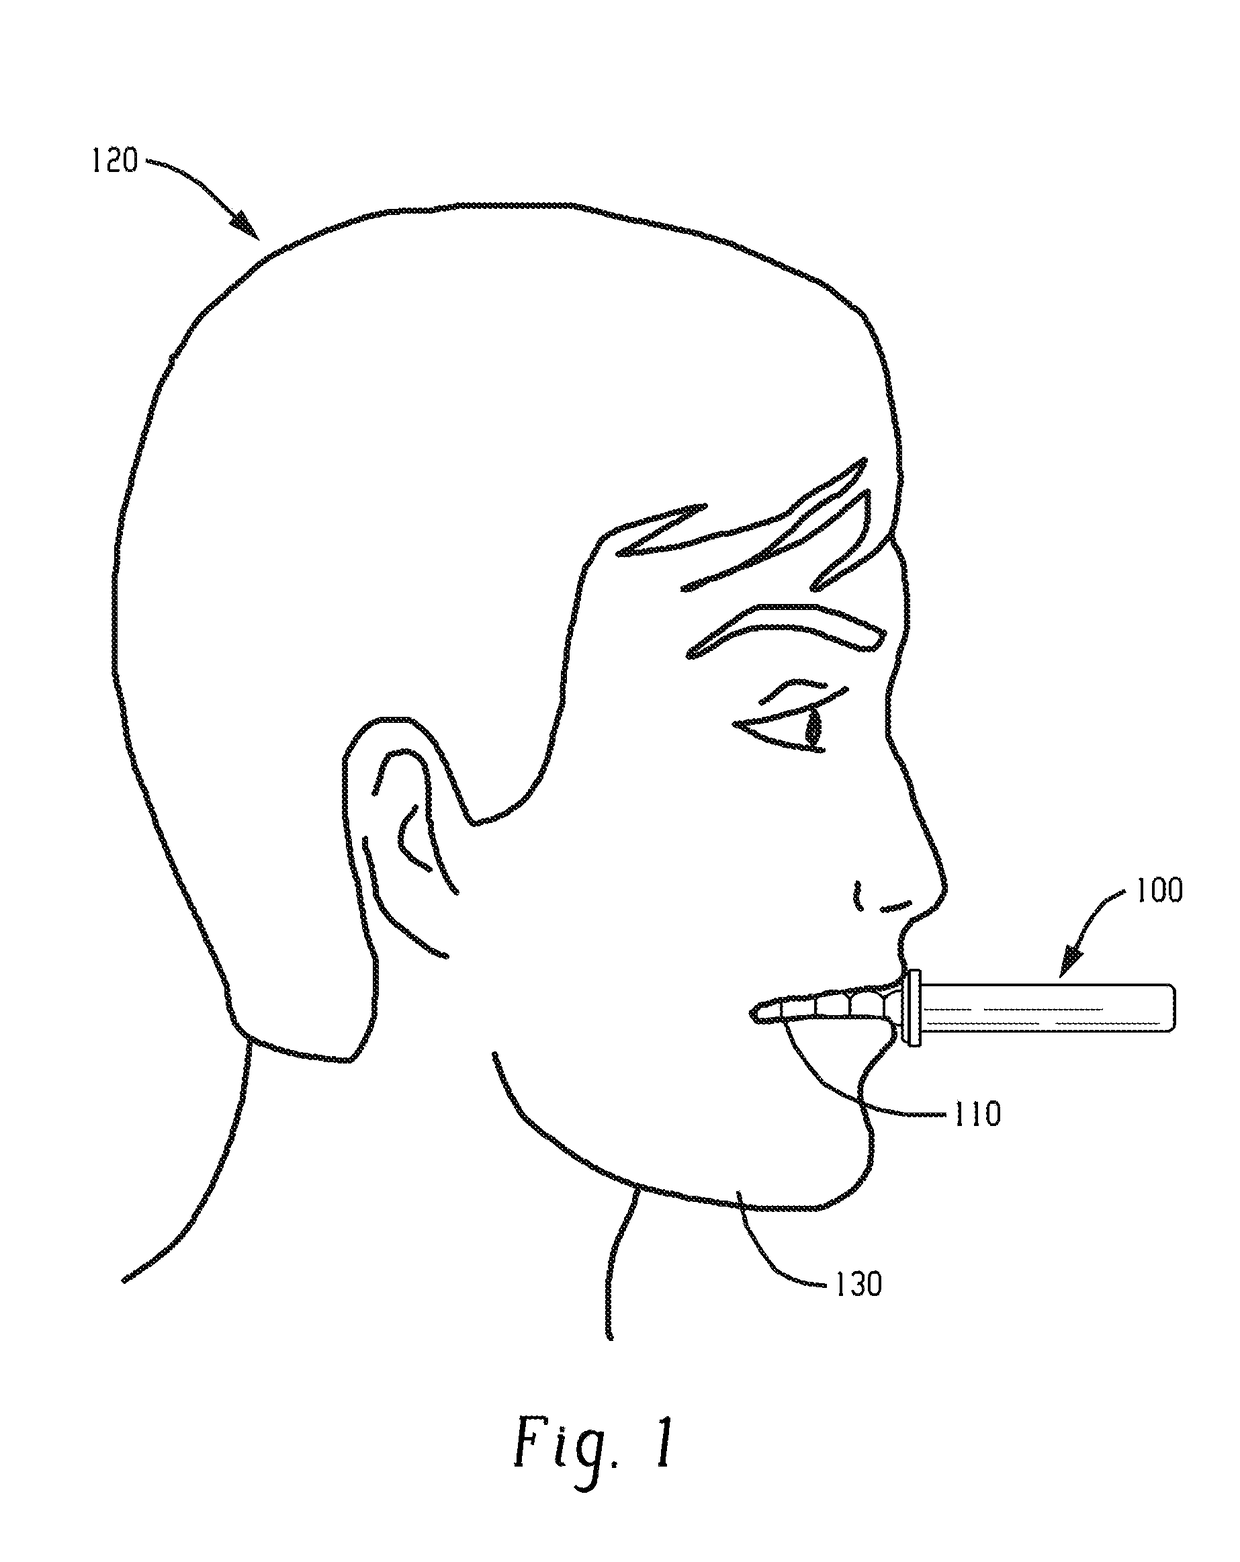 Oral function device